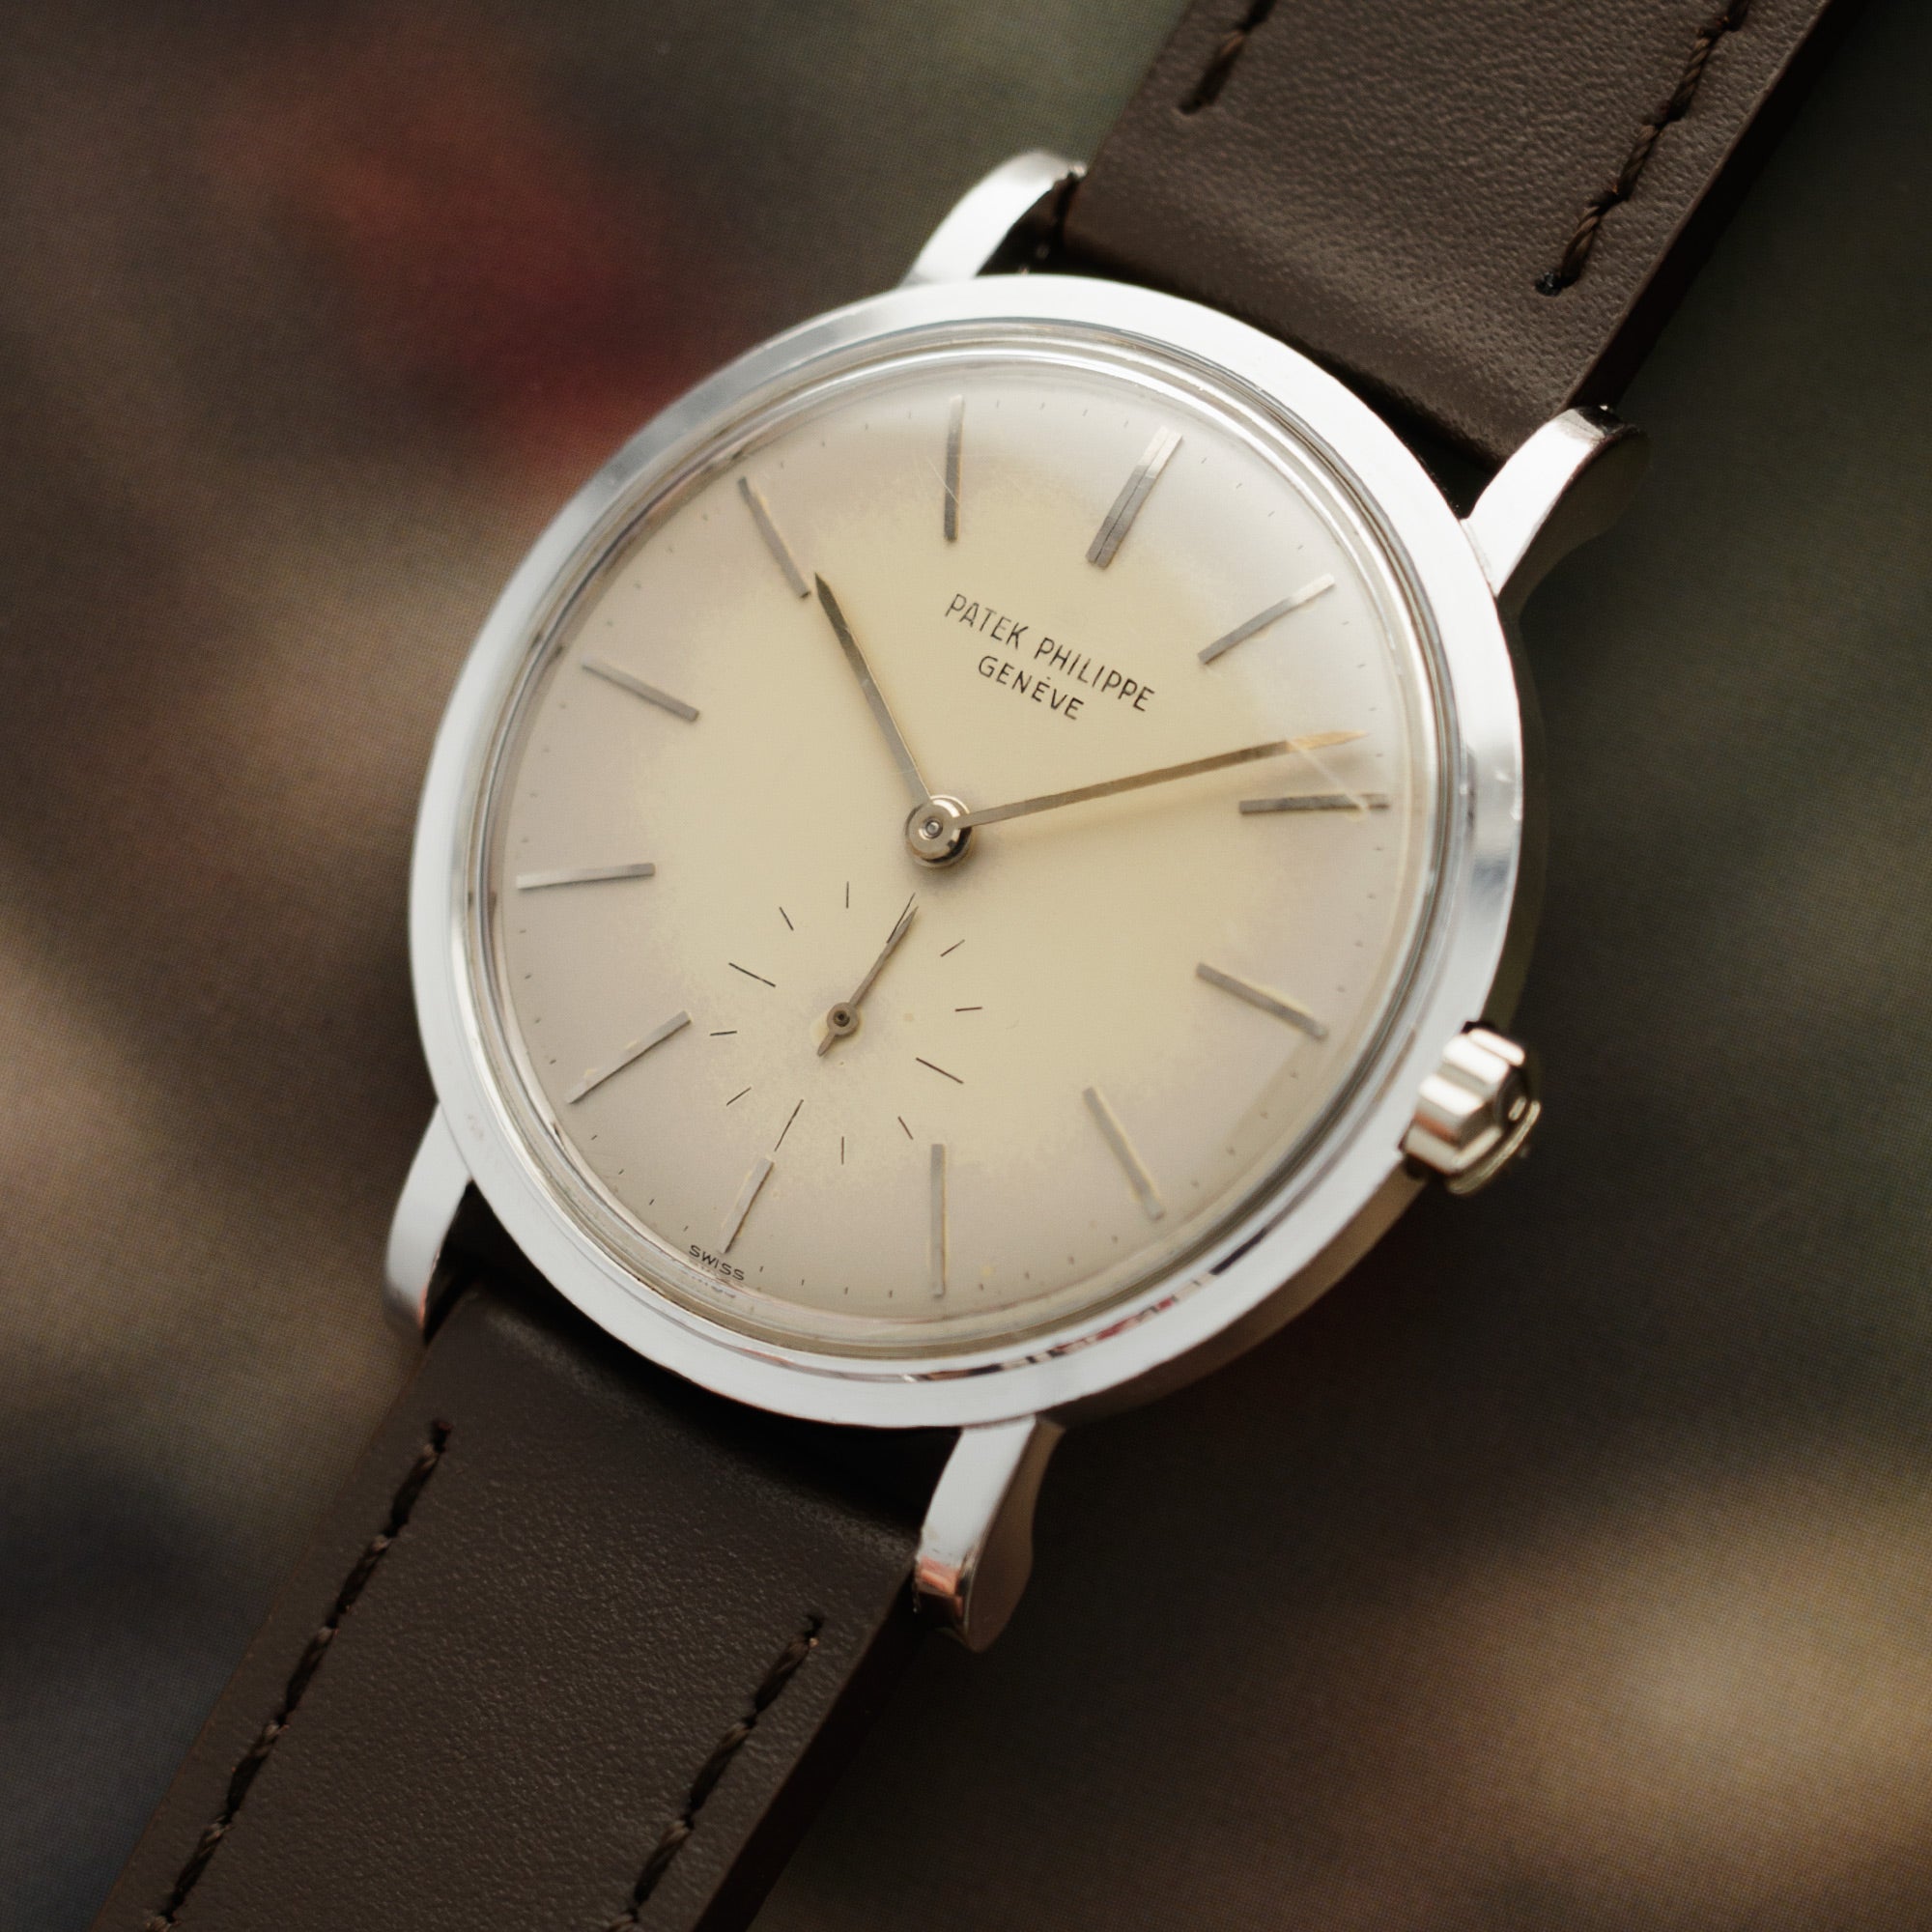 Patek Philippe - Patek Philippe White Gold Calatrava Watch Ref. 3429 with Attractive Aged Dial - The Keystone Watches